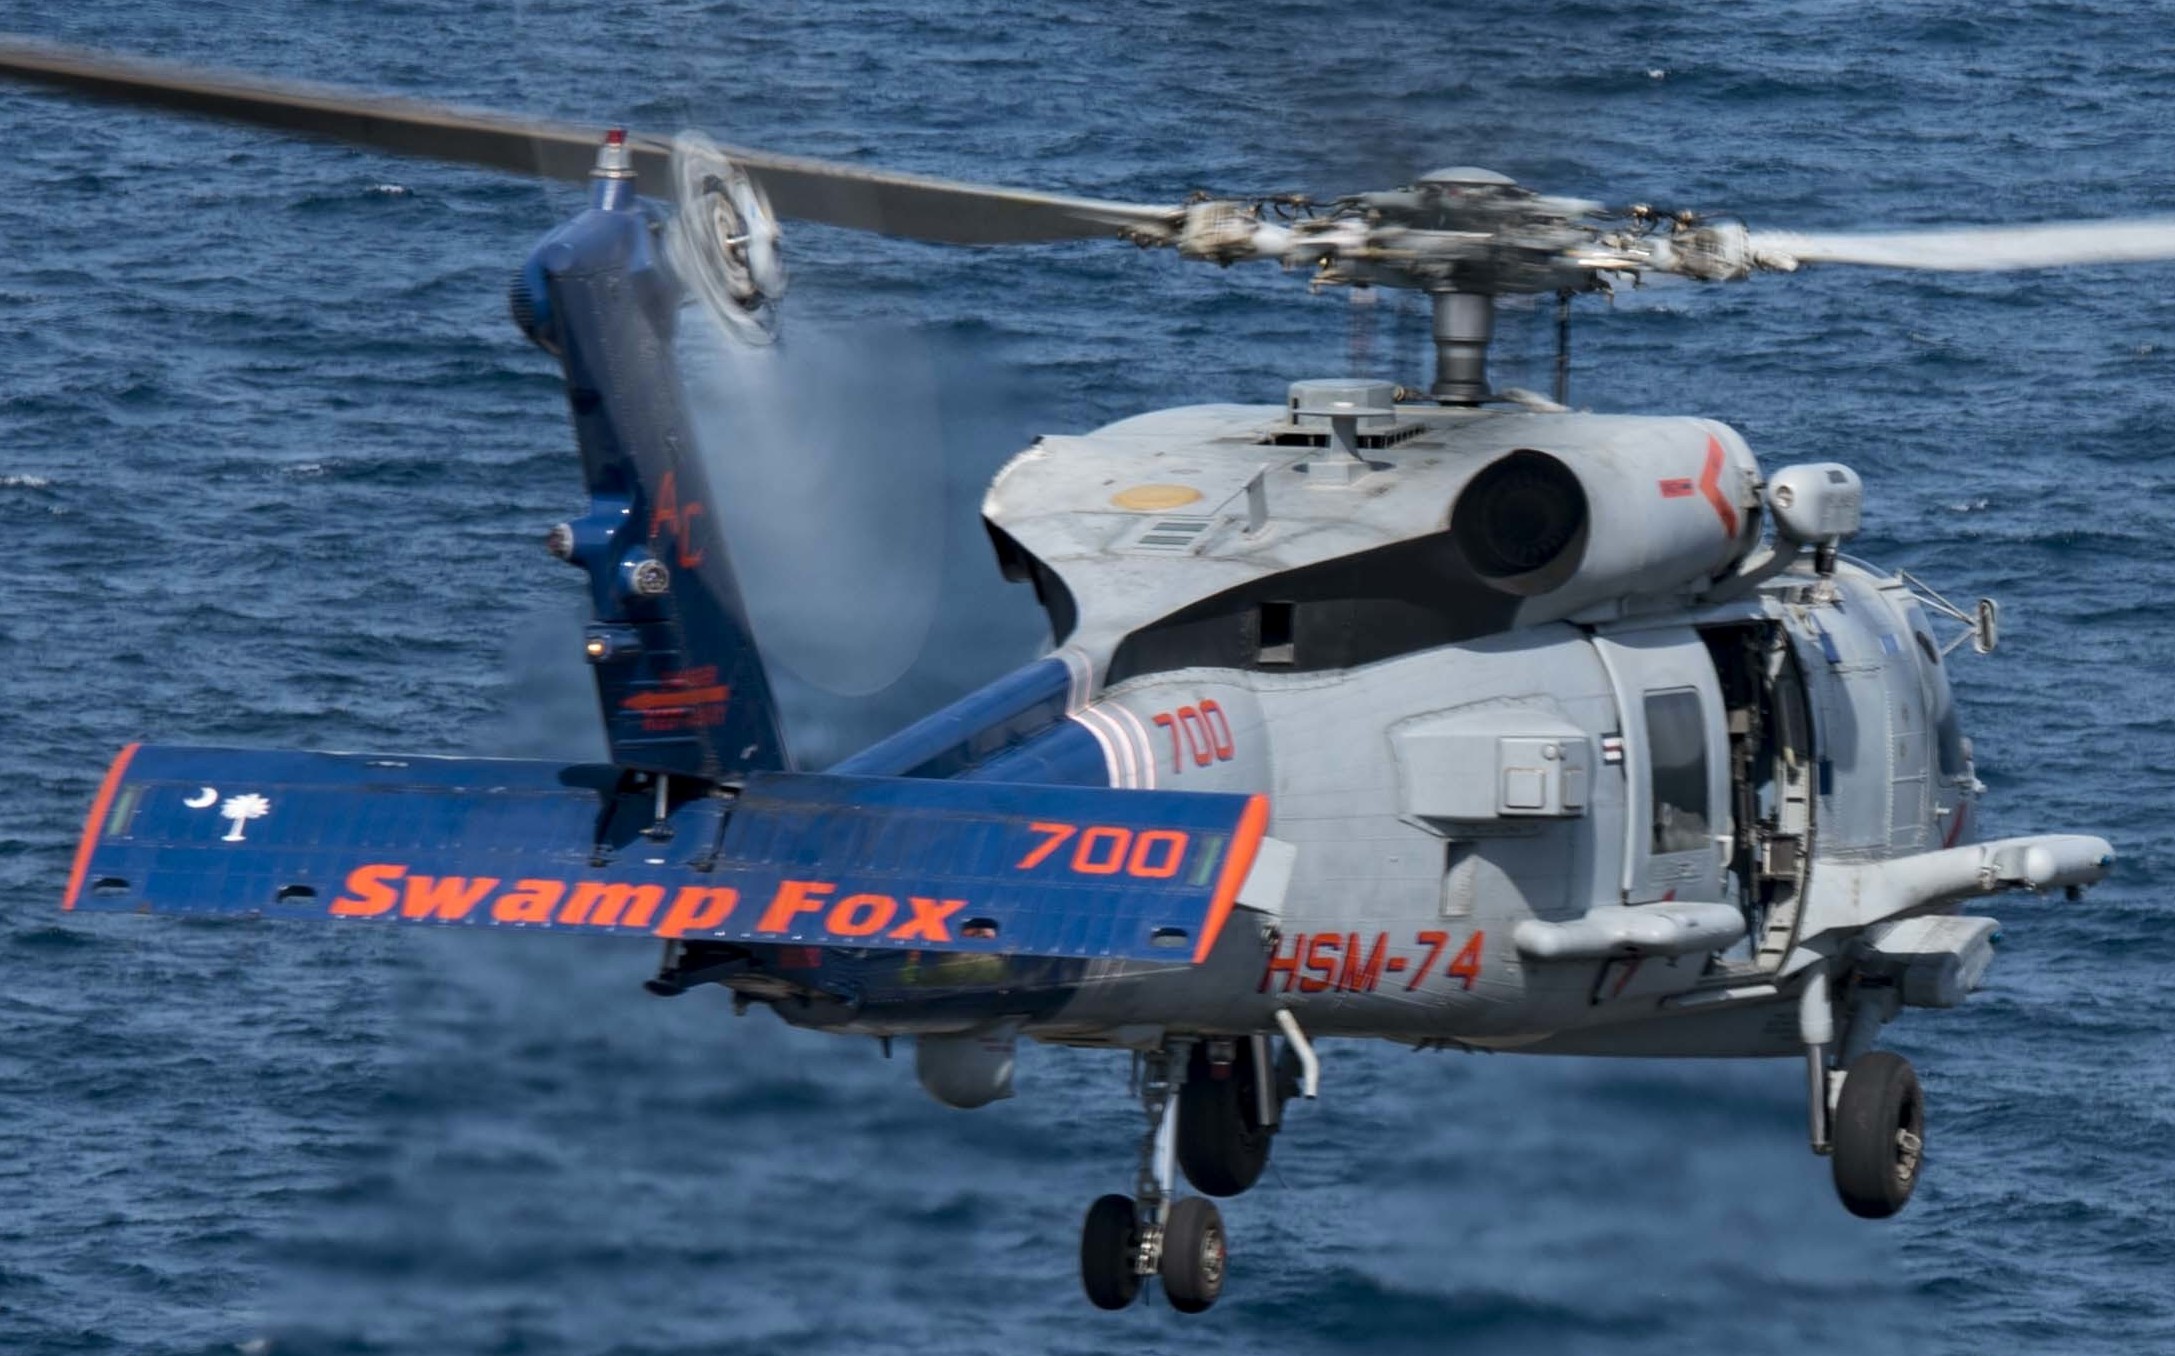 hsm-74 swamp foxes helicopter maritime strike squadron us navy mh-60r seahawk 2016 56